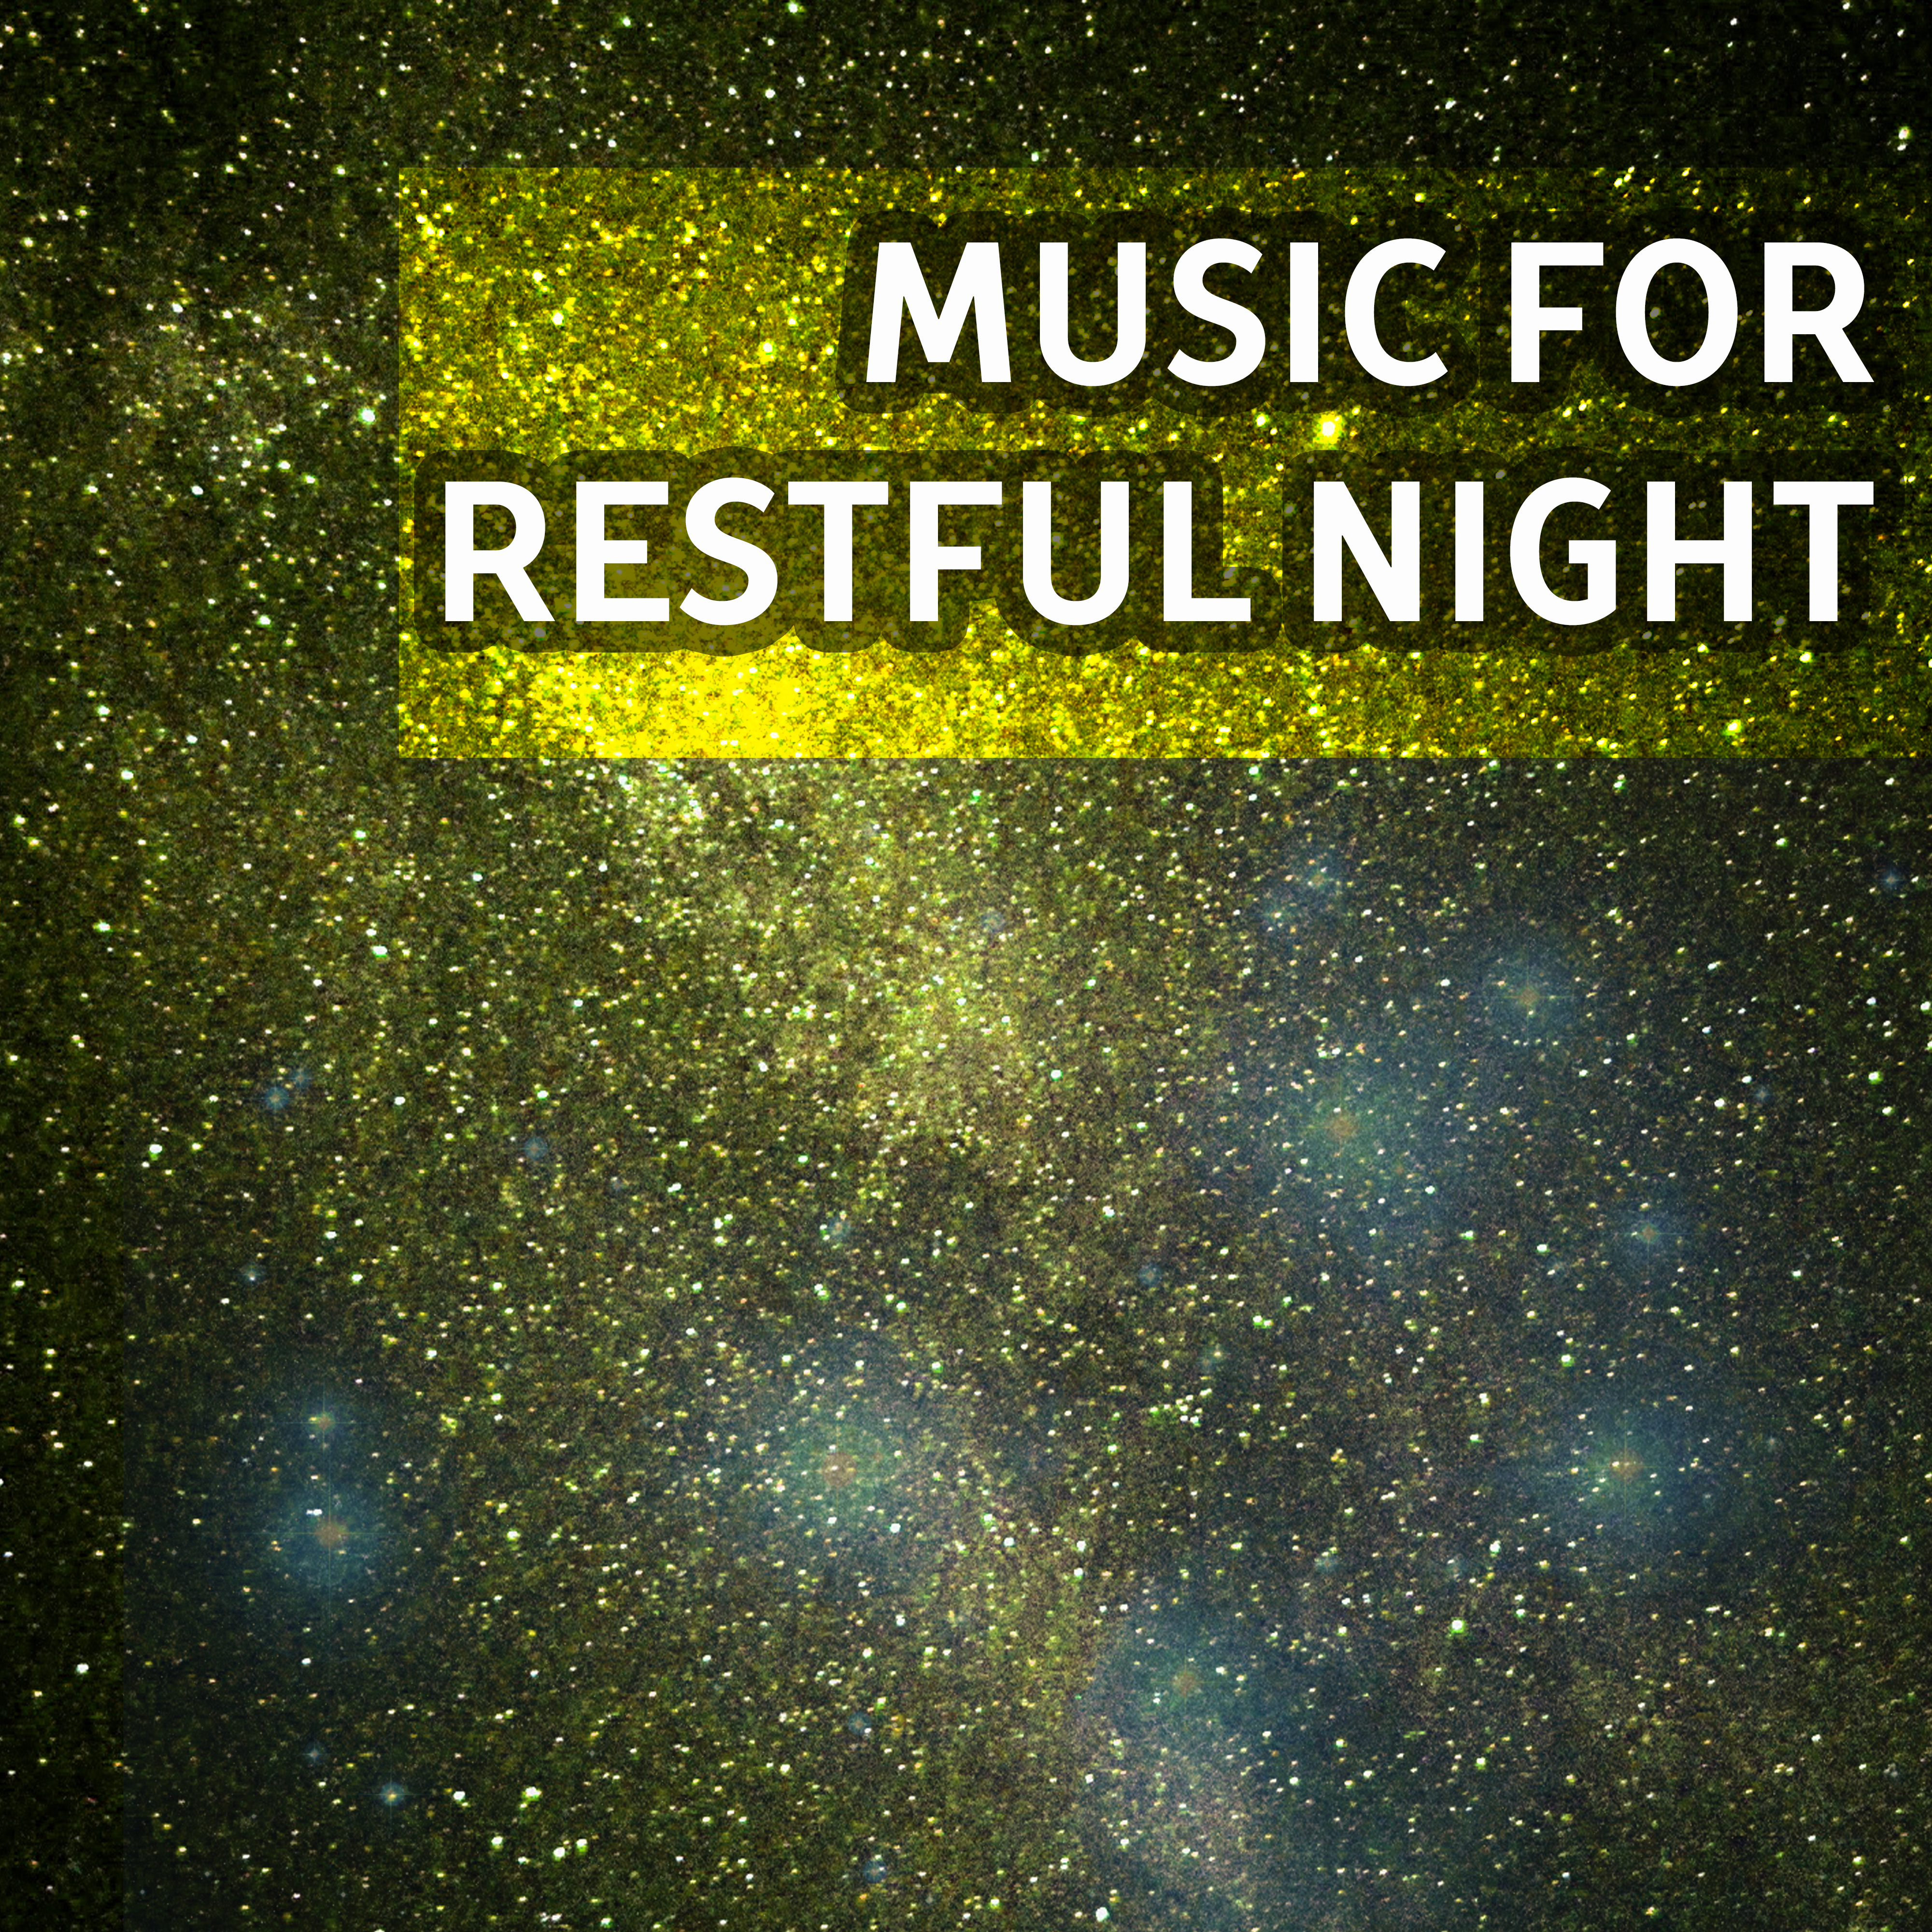 Music for Restful Night – Peaceful Natural Songs for Calm Down, Stress Relief, Fall Asleep Faster, Insomnia Solution, Deep Sleep